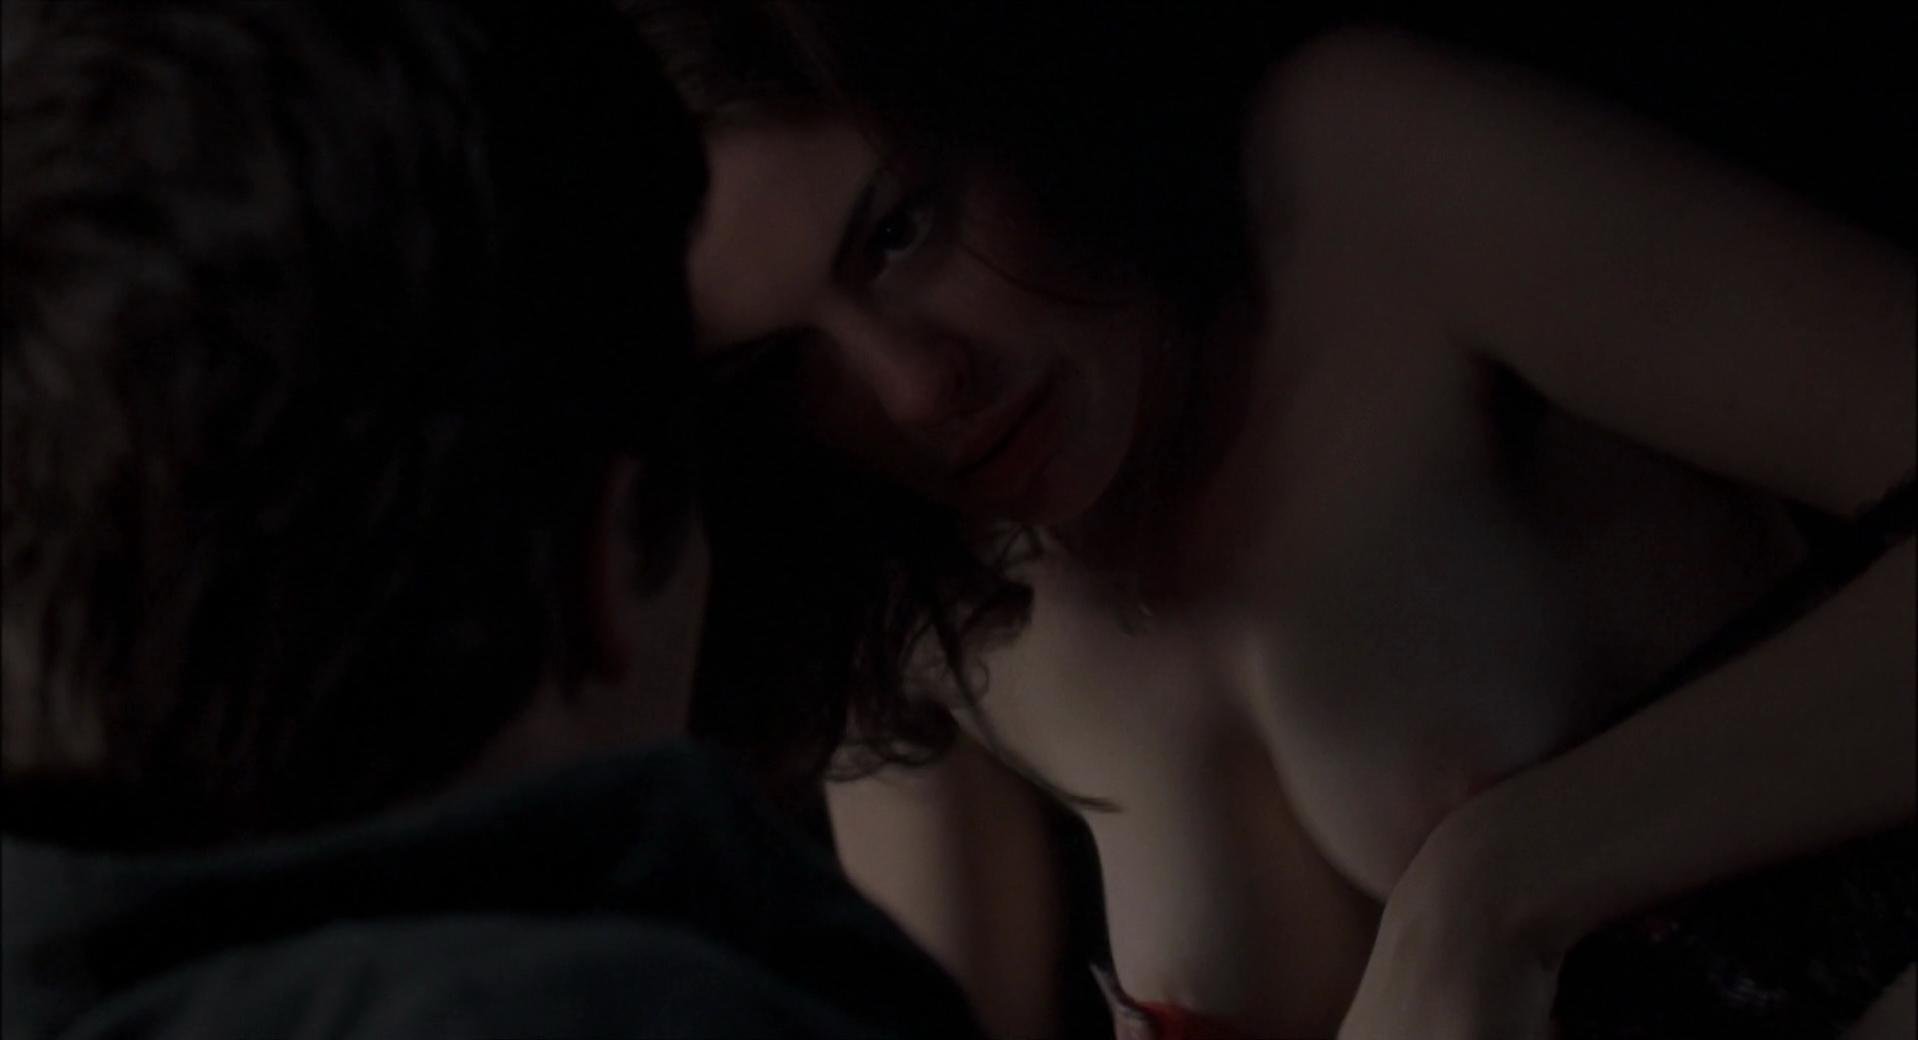 Nude video celebs » Michelle Williams nude, Anne Hathaway nude ...